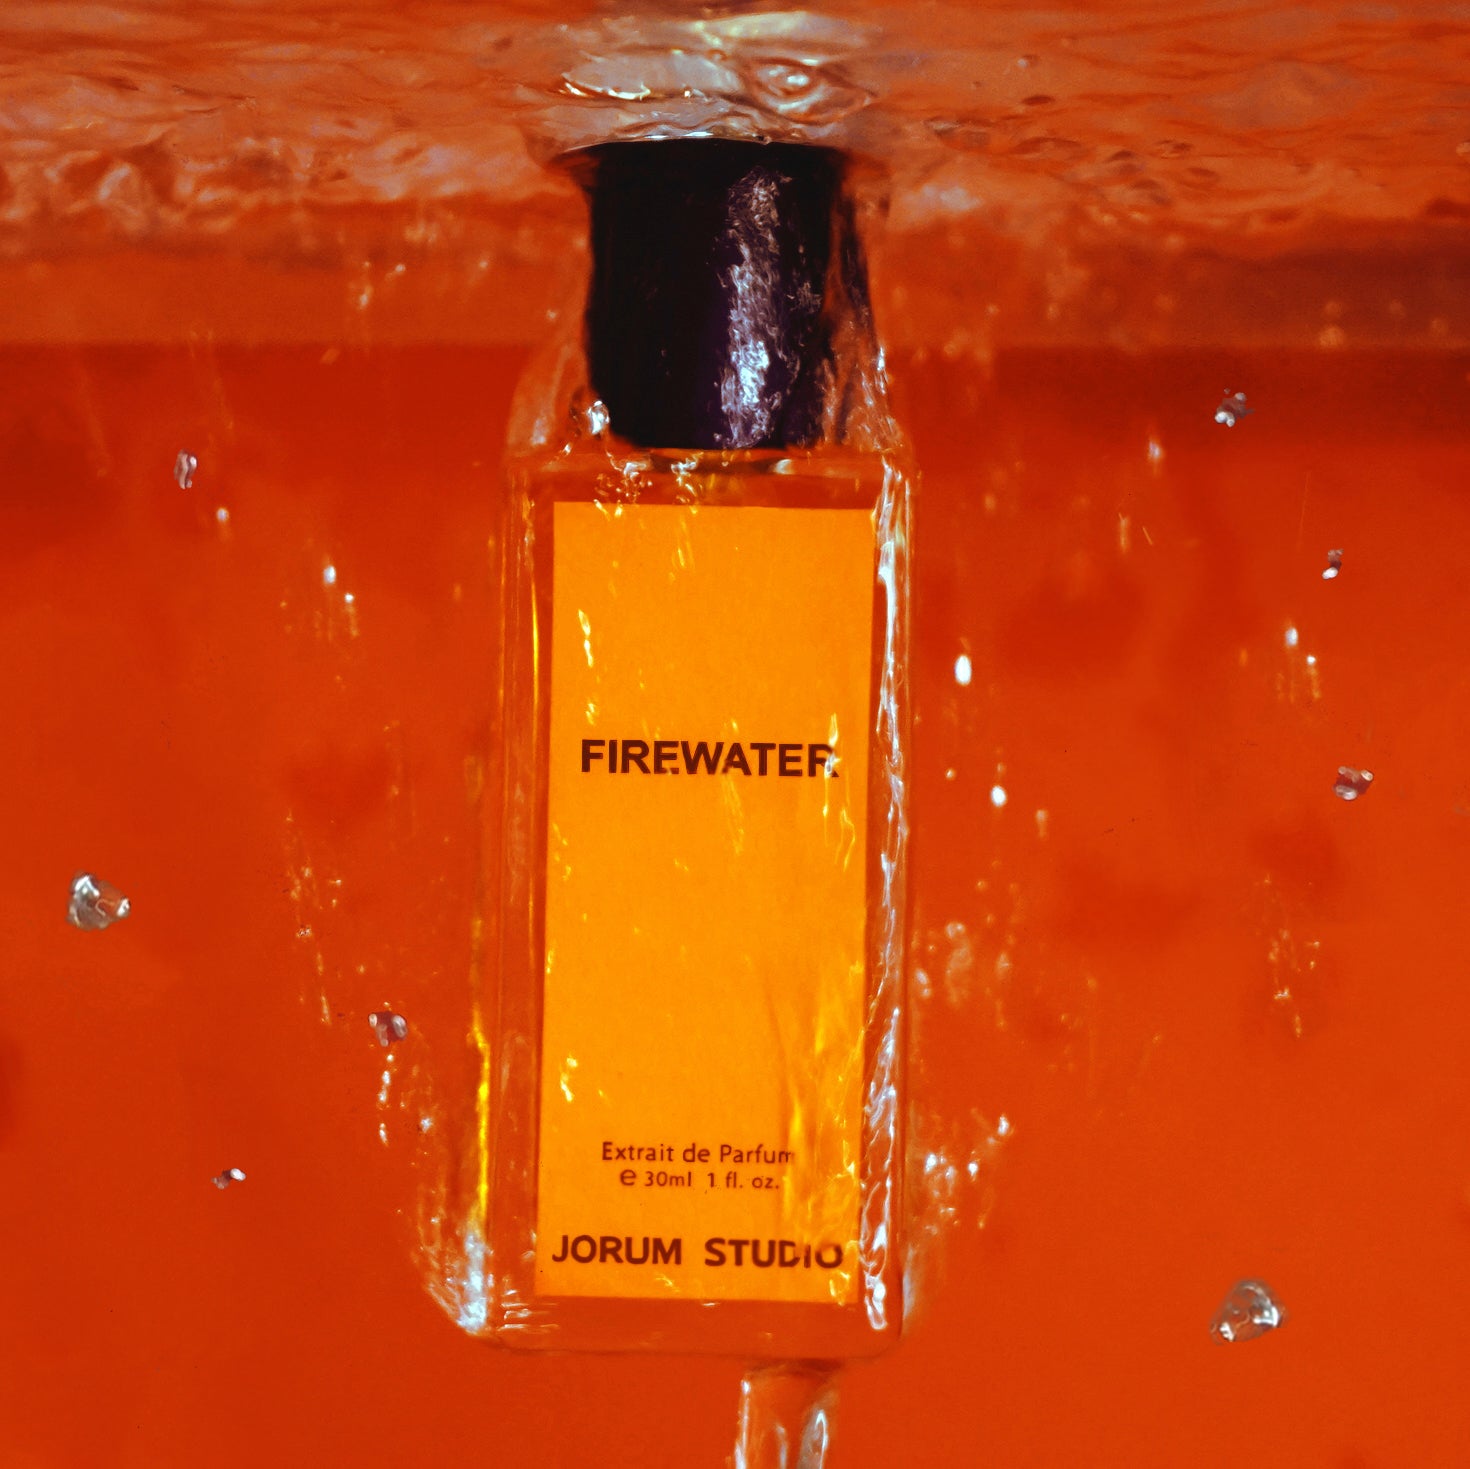 Bottle of Jorum Studio Firewater perfume with water pouring update down and orange background